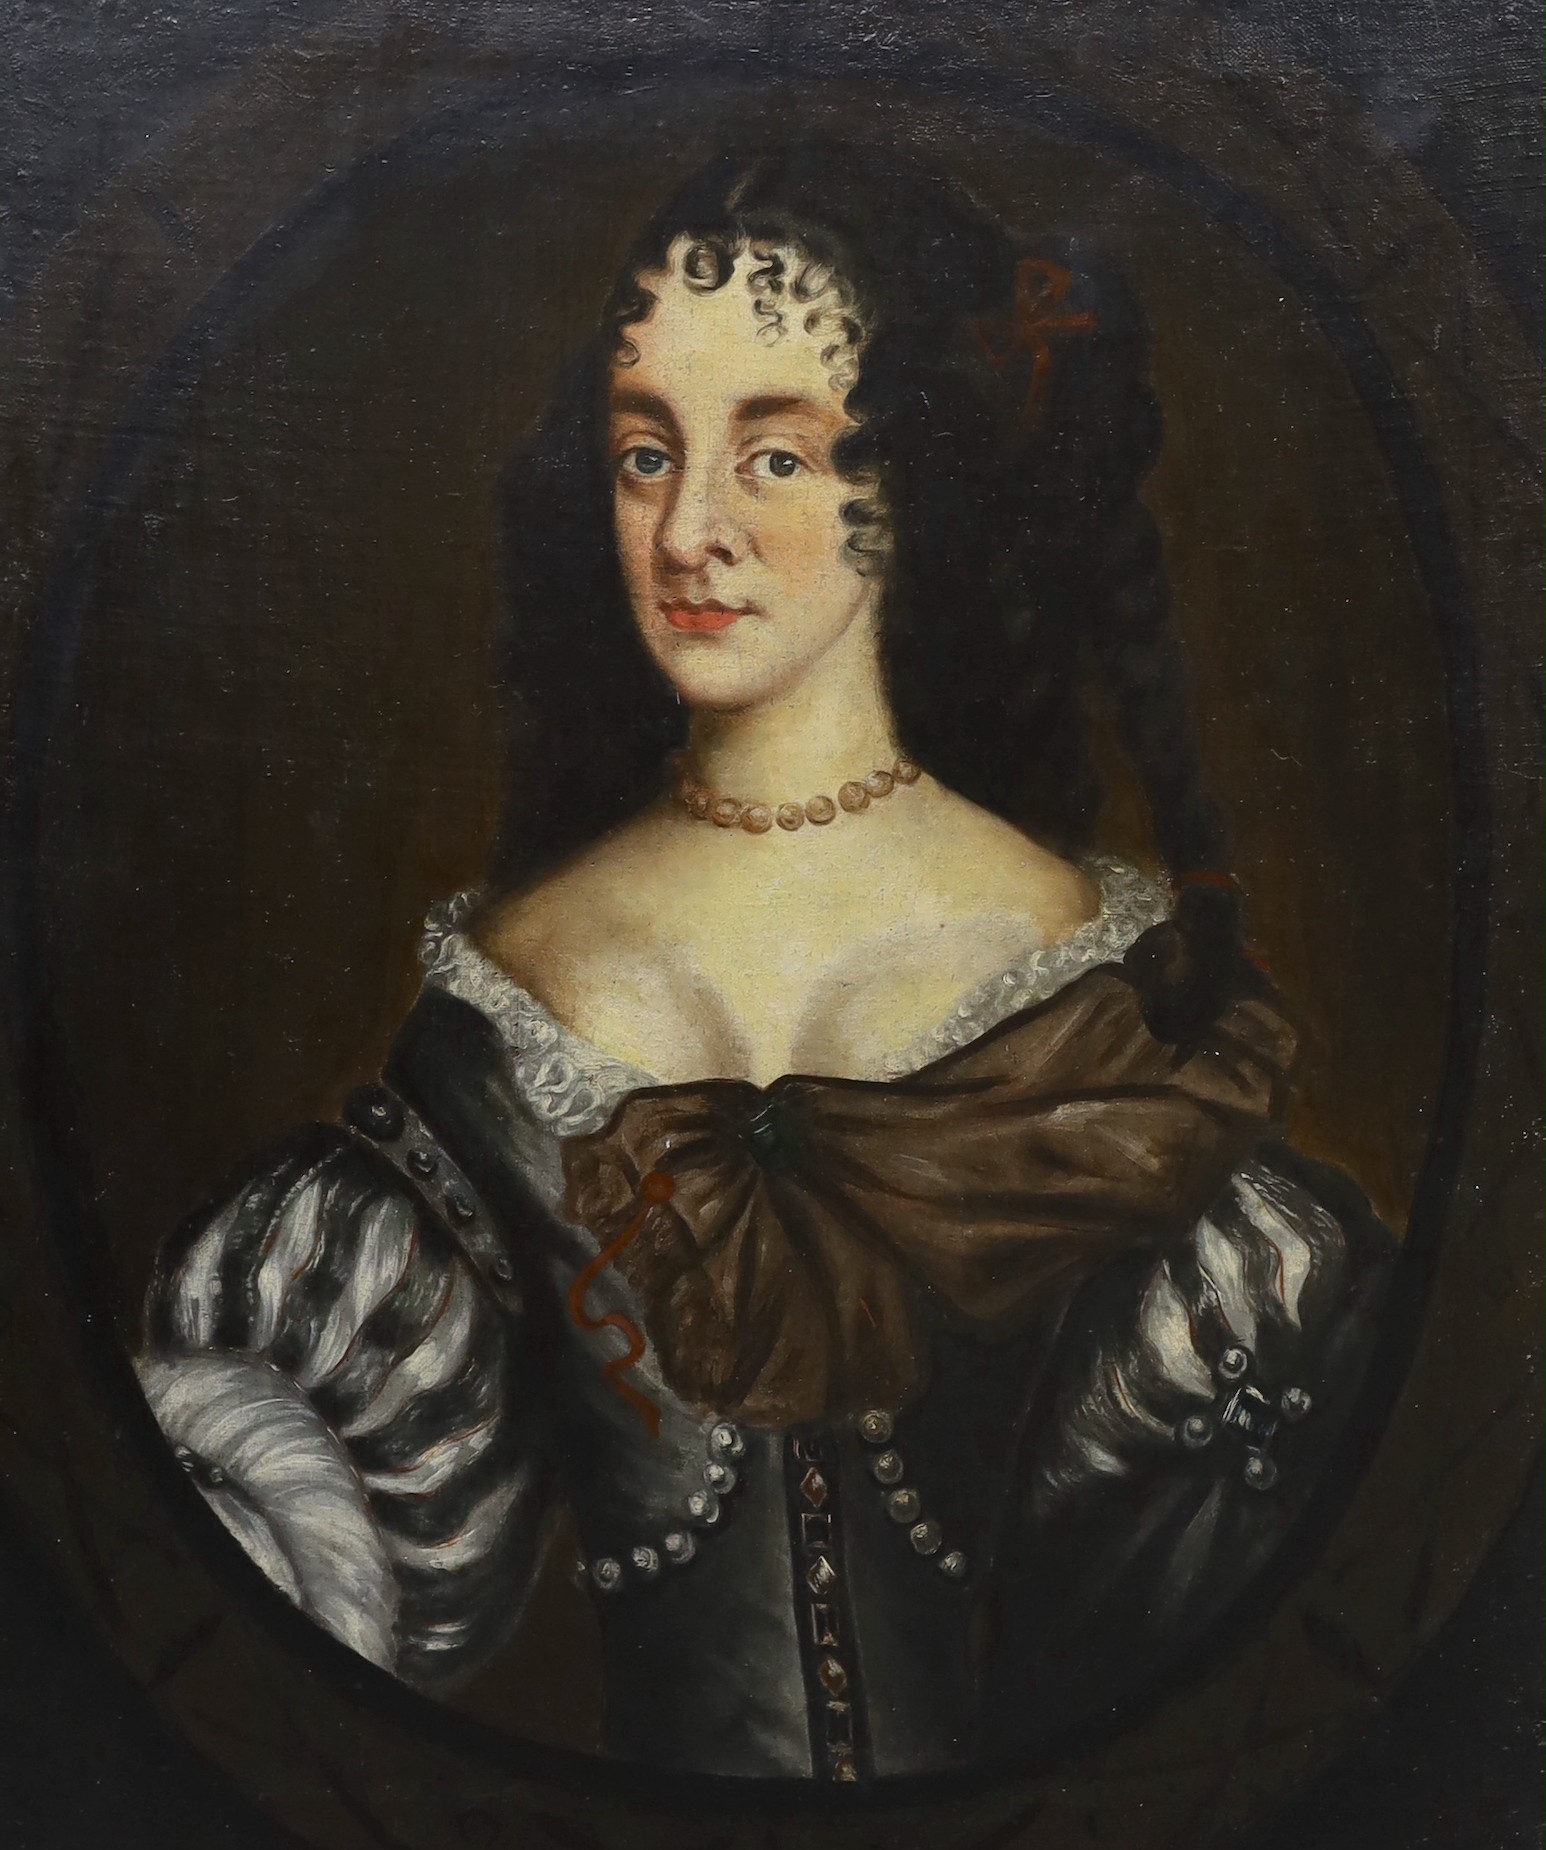 17th century English School, oil on canvas, Portrait of a lady thought to be Henrietta Maria, 78 x 66cm